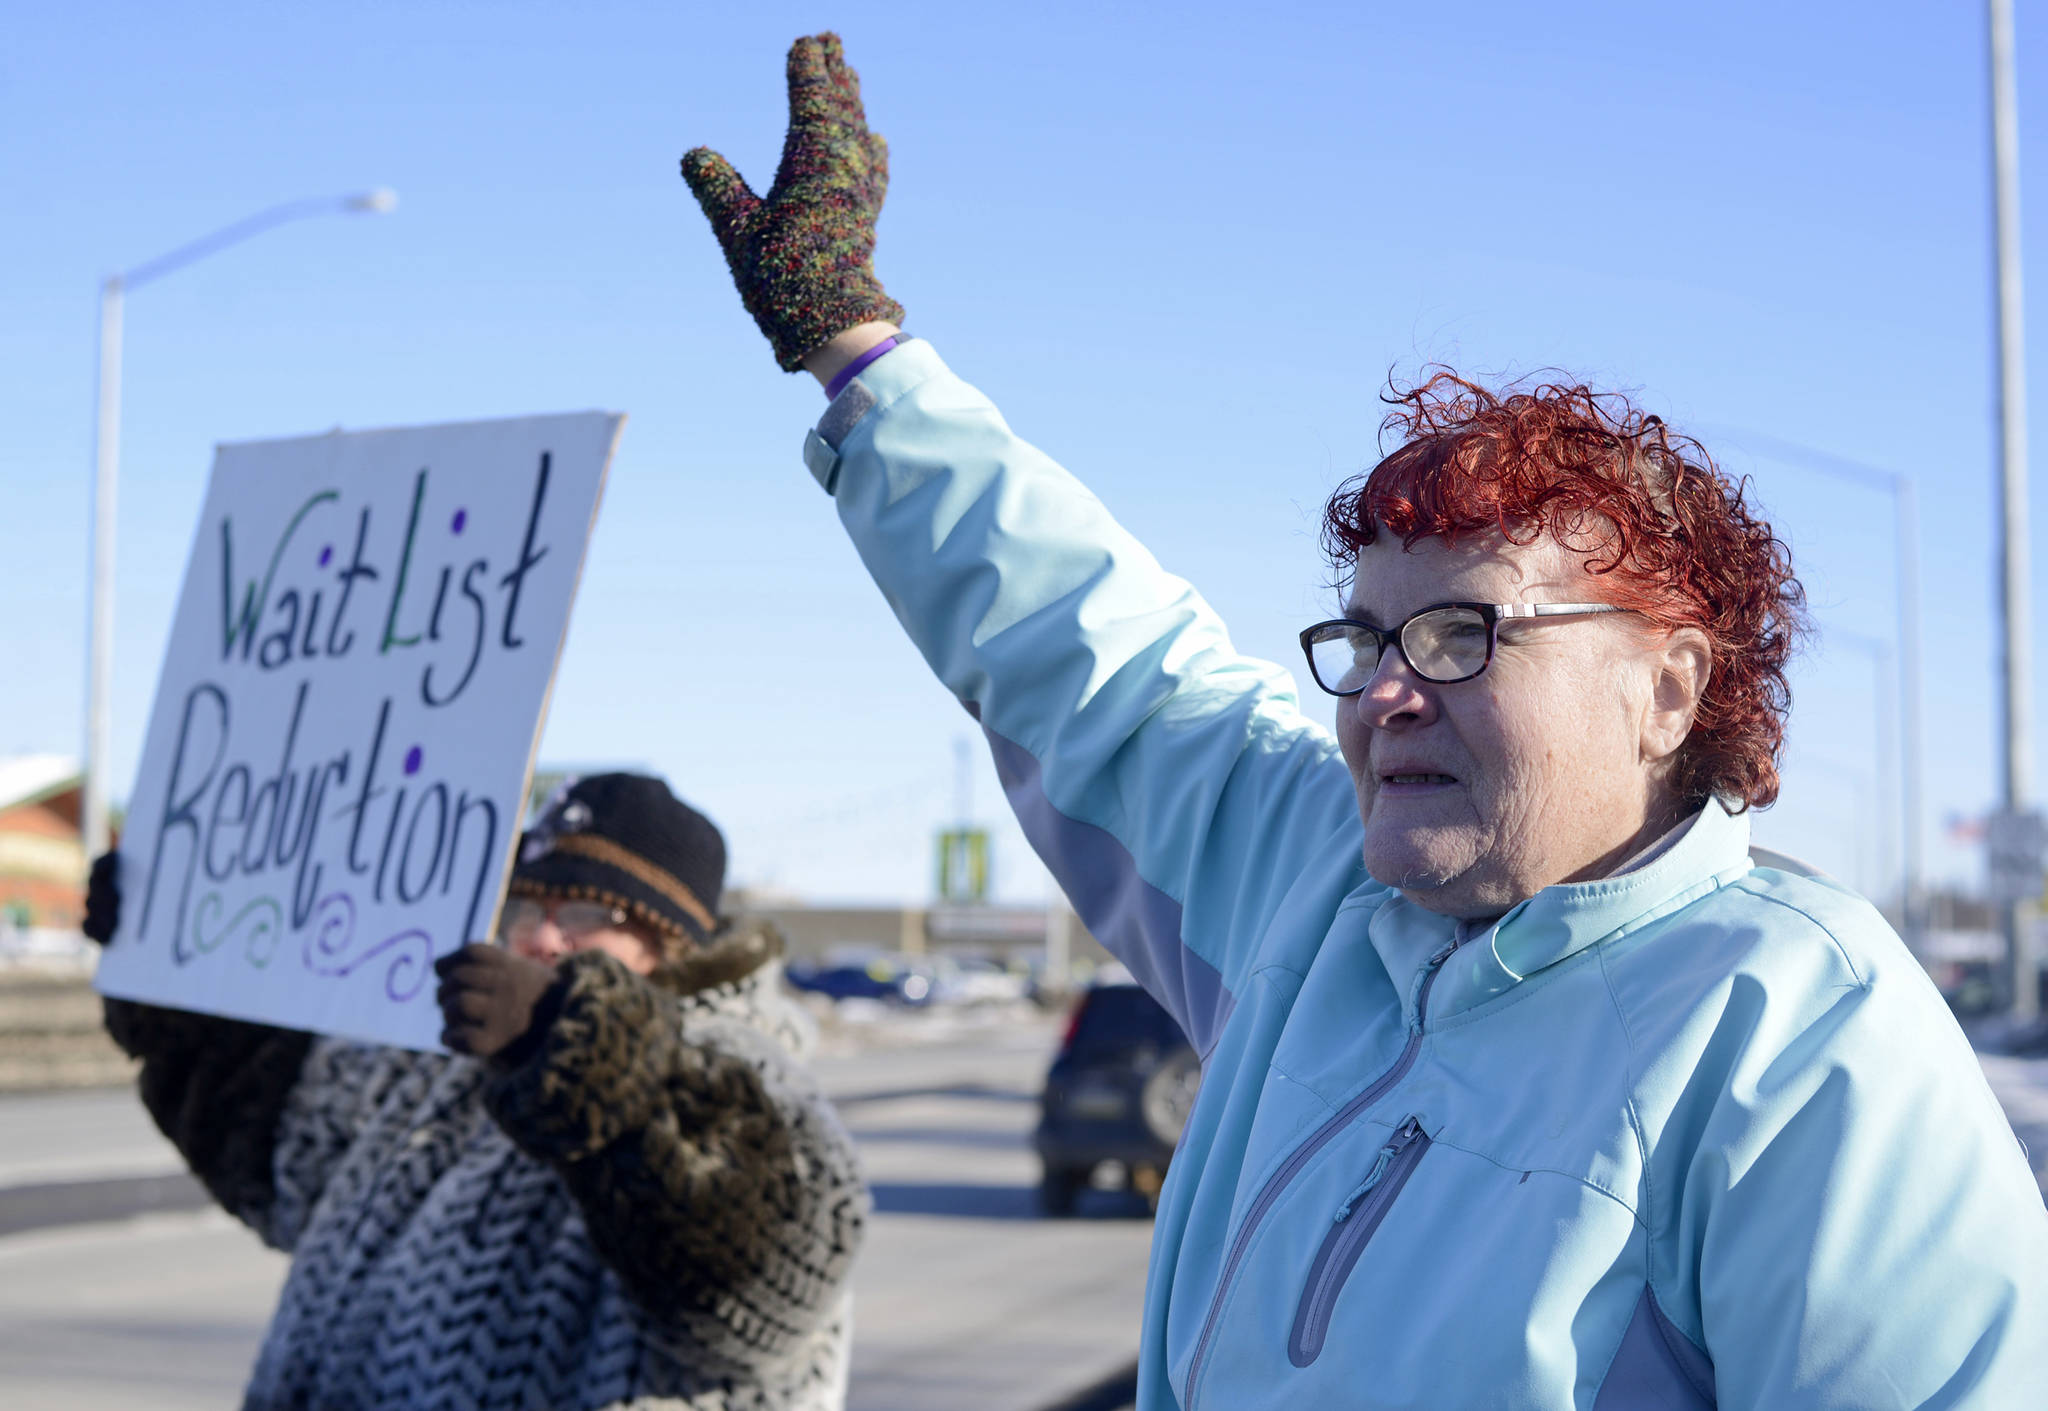 Teresa Reger (left, with sign) and Susie Stafford wave to passing cars at the annual demonstration in support of disability services by the Key Coalition advocacy group, held this year on Friday in Soldotna. Reger and Stafford are both parents of disabled adult children who receive services through the program the Key Campaign seeks to preserve. (Ben Boettger/Peninsula Clarion)